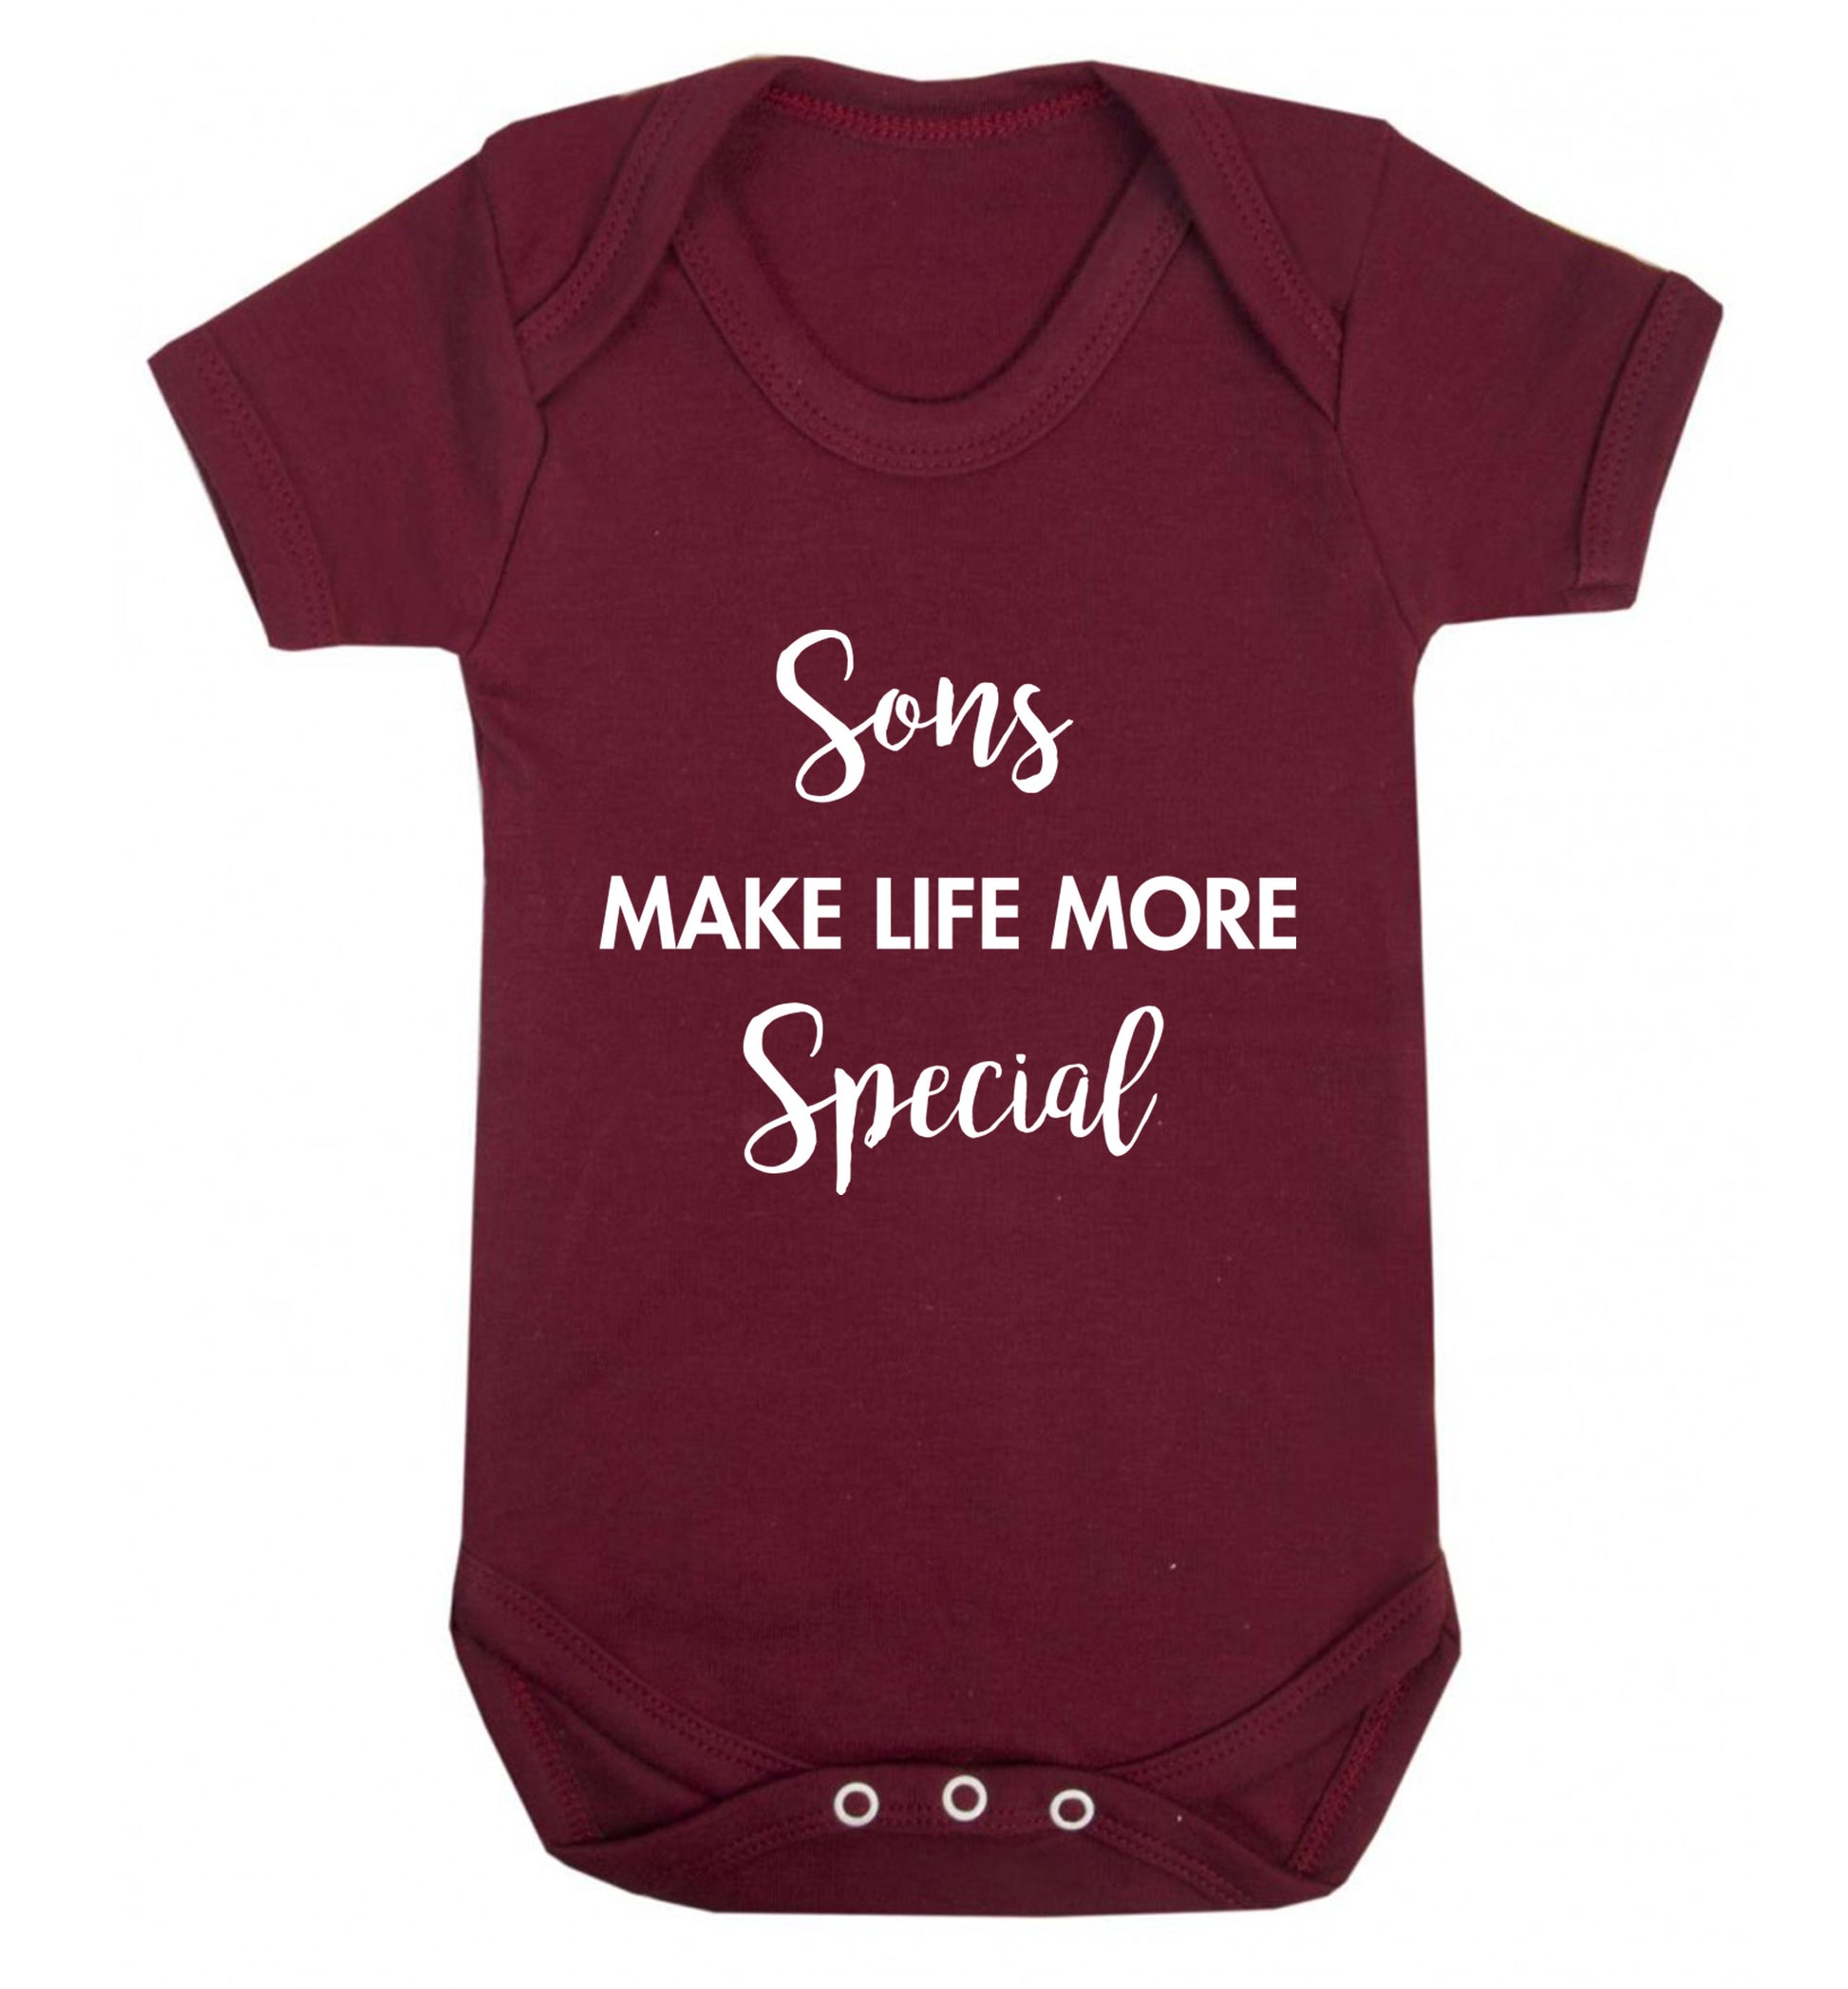 Sons make life more special Baby Vest maroon 18-24 months